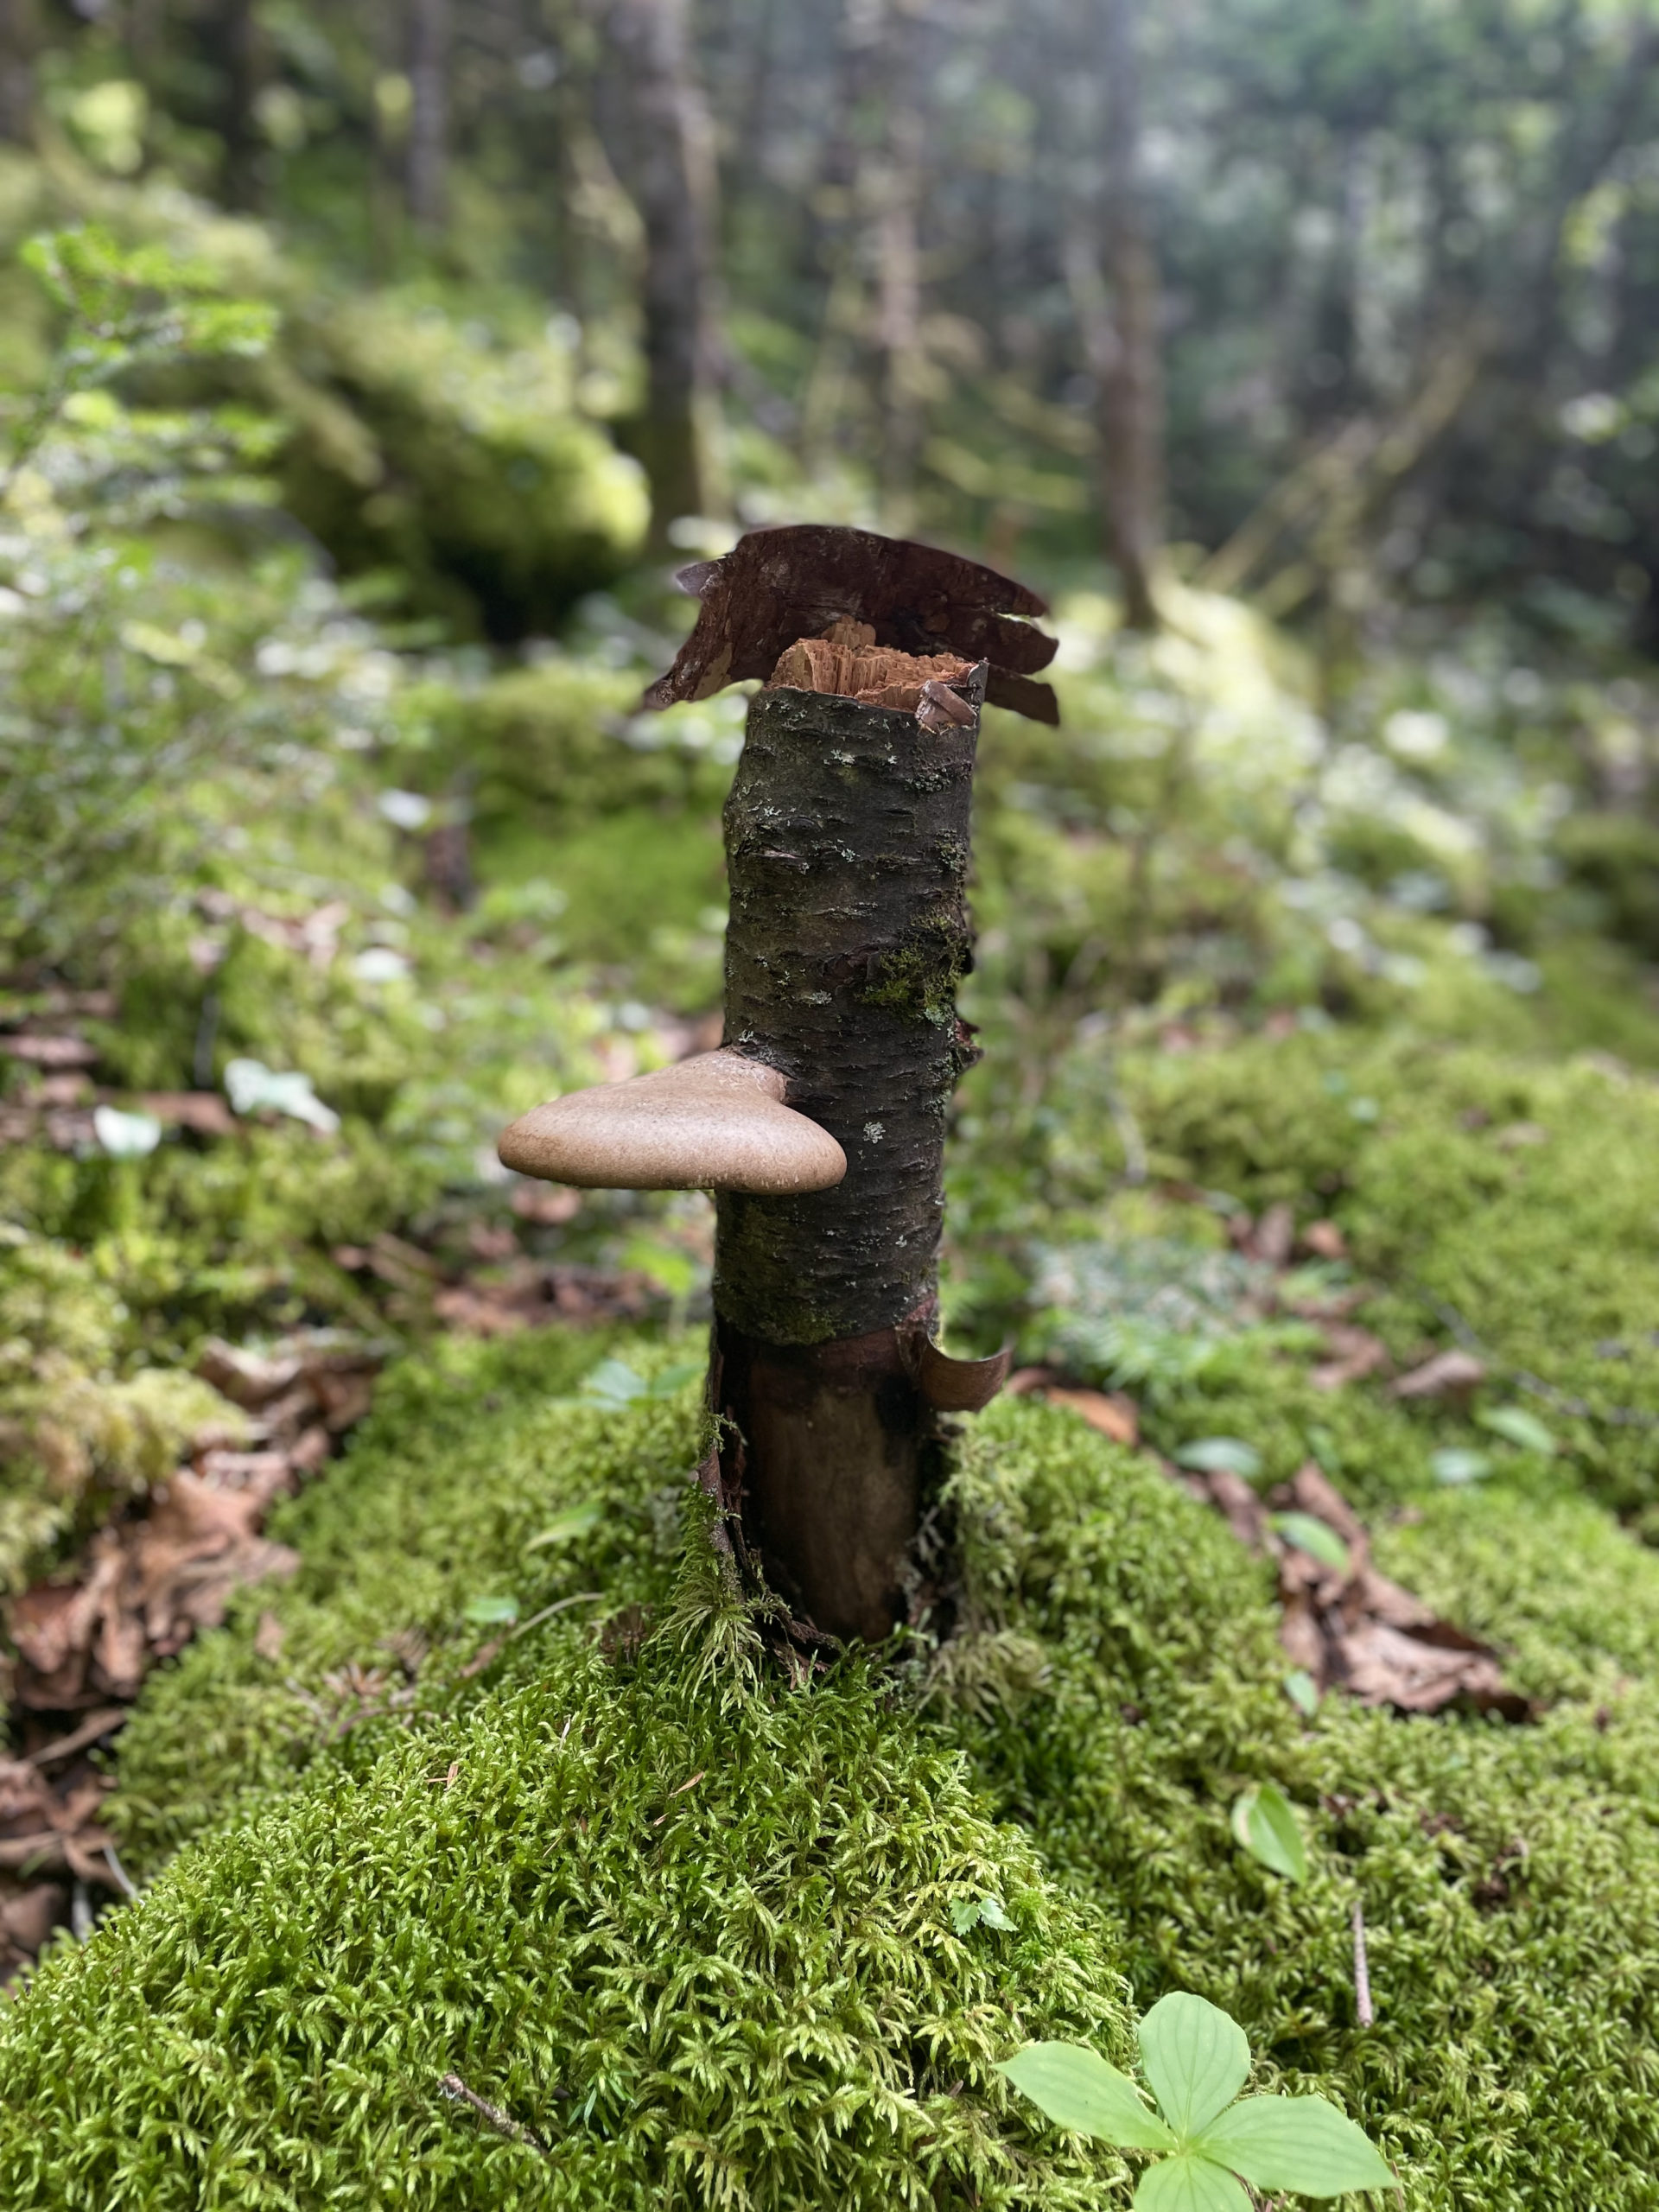 Mushroom on a stump seen while hiking Mt. Waumbek and Mt. Cabot in the White Mountain National Forest, New Hampshire